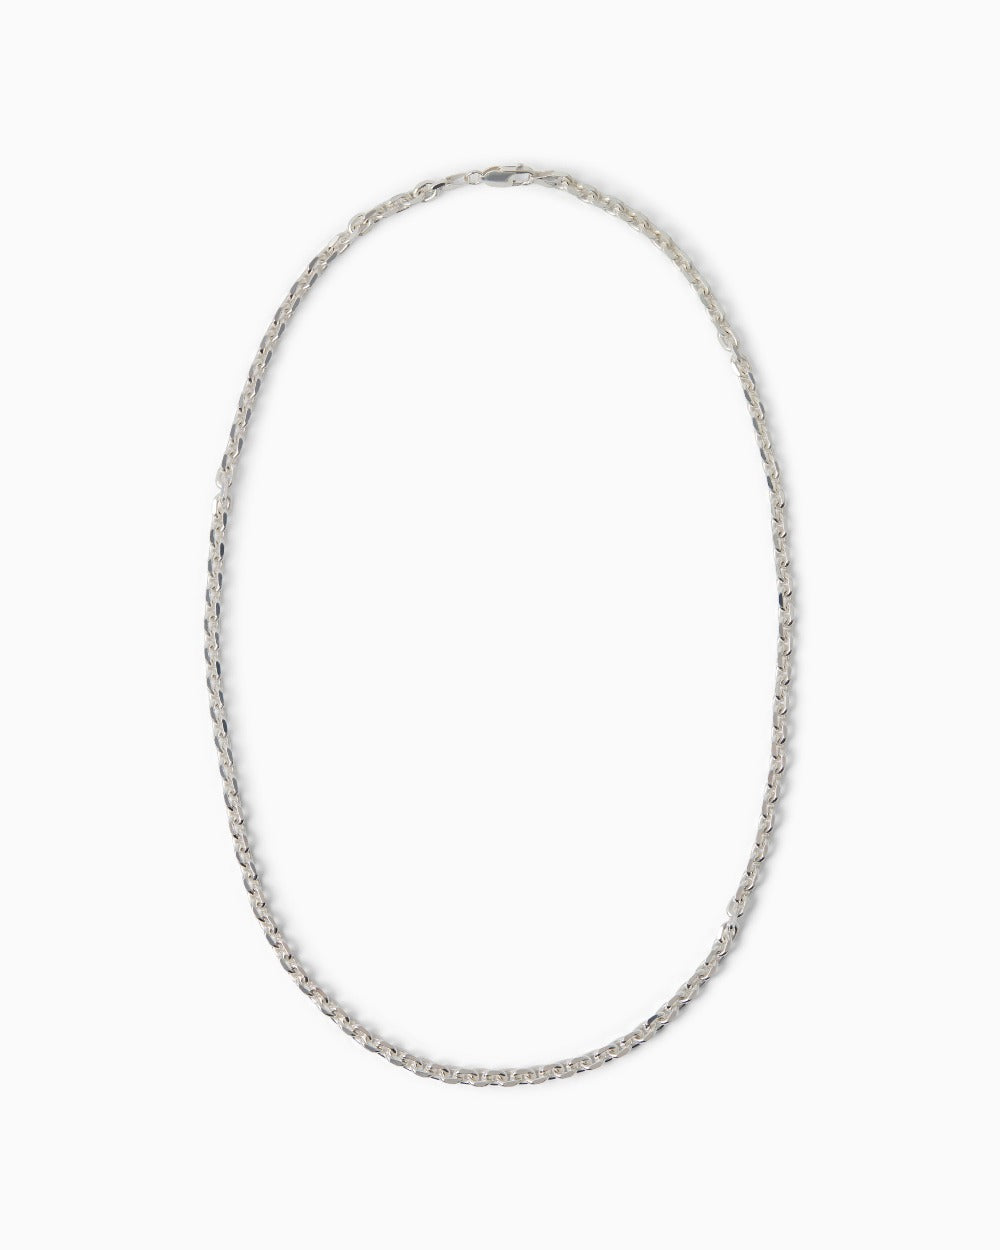 Harbour Necklace - Sterling Silver